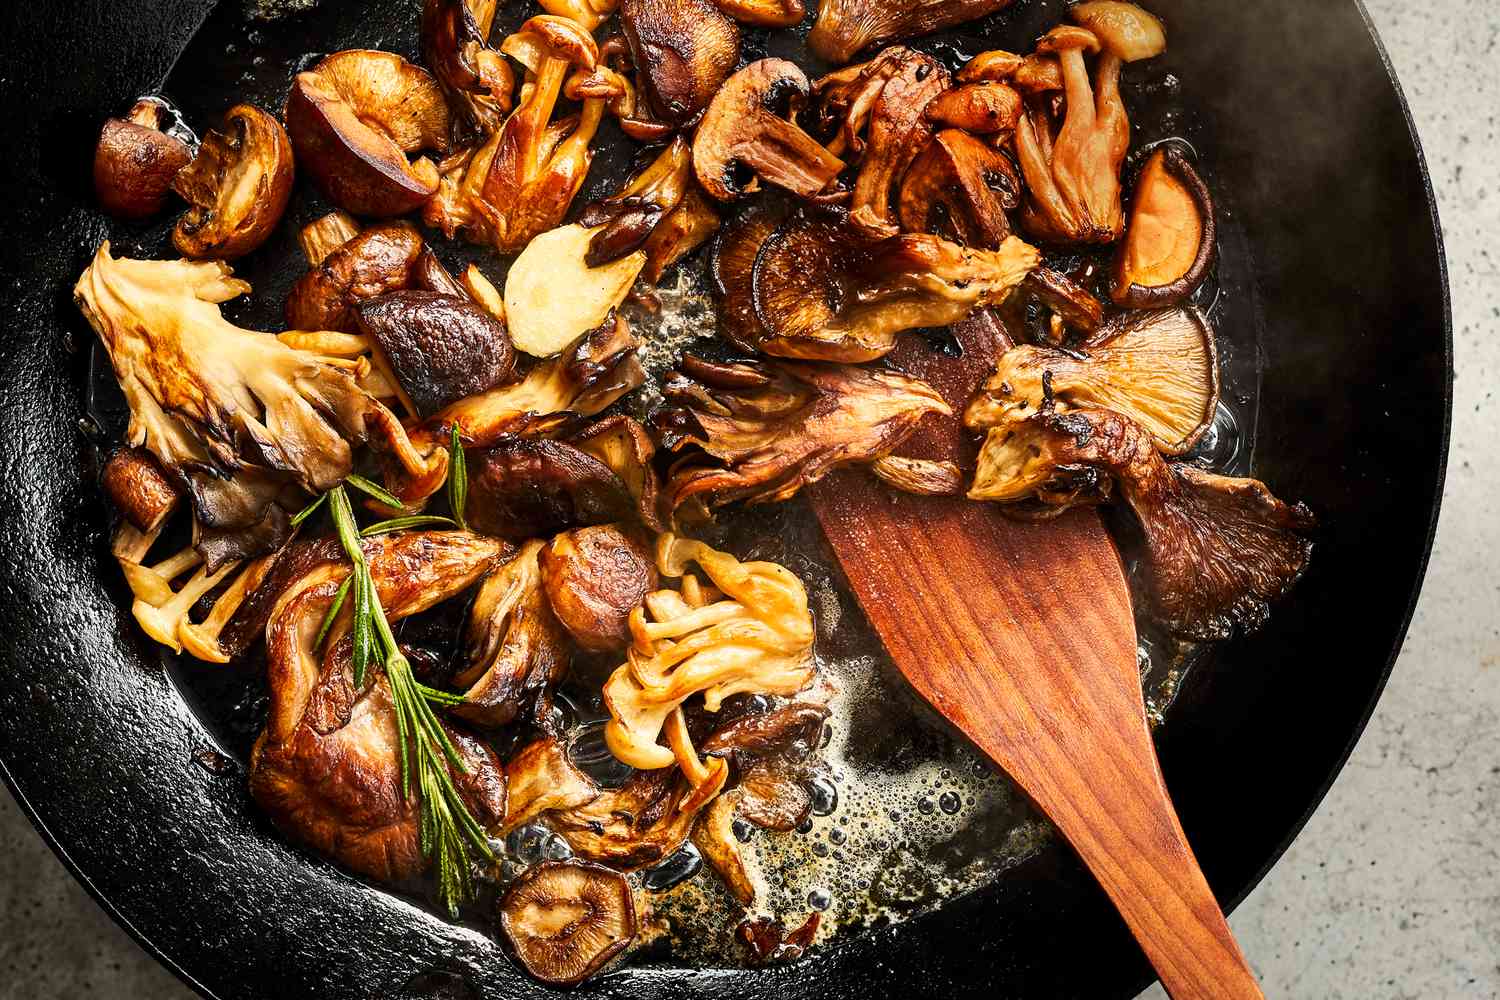 What Herbs Go Best With Mushrooms